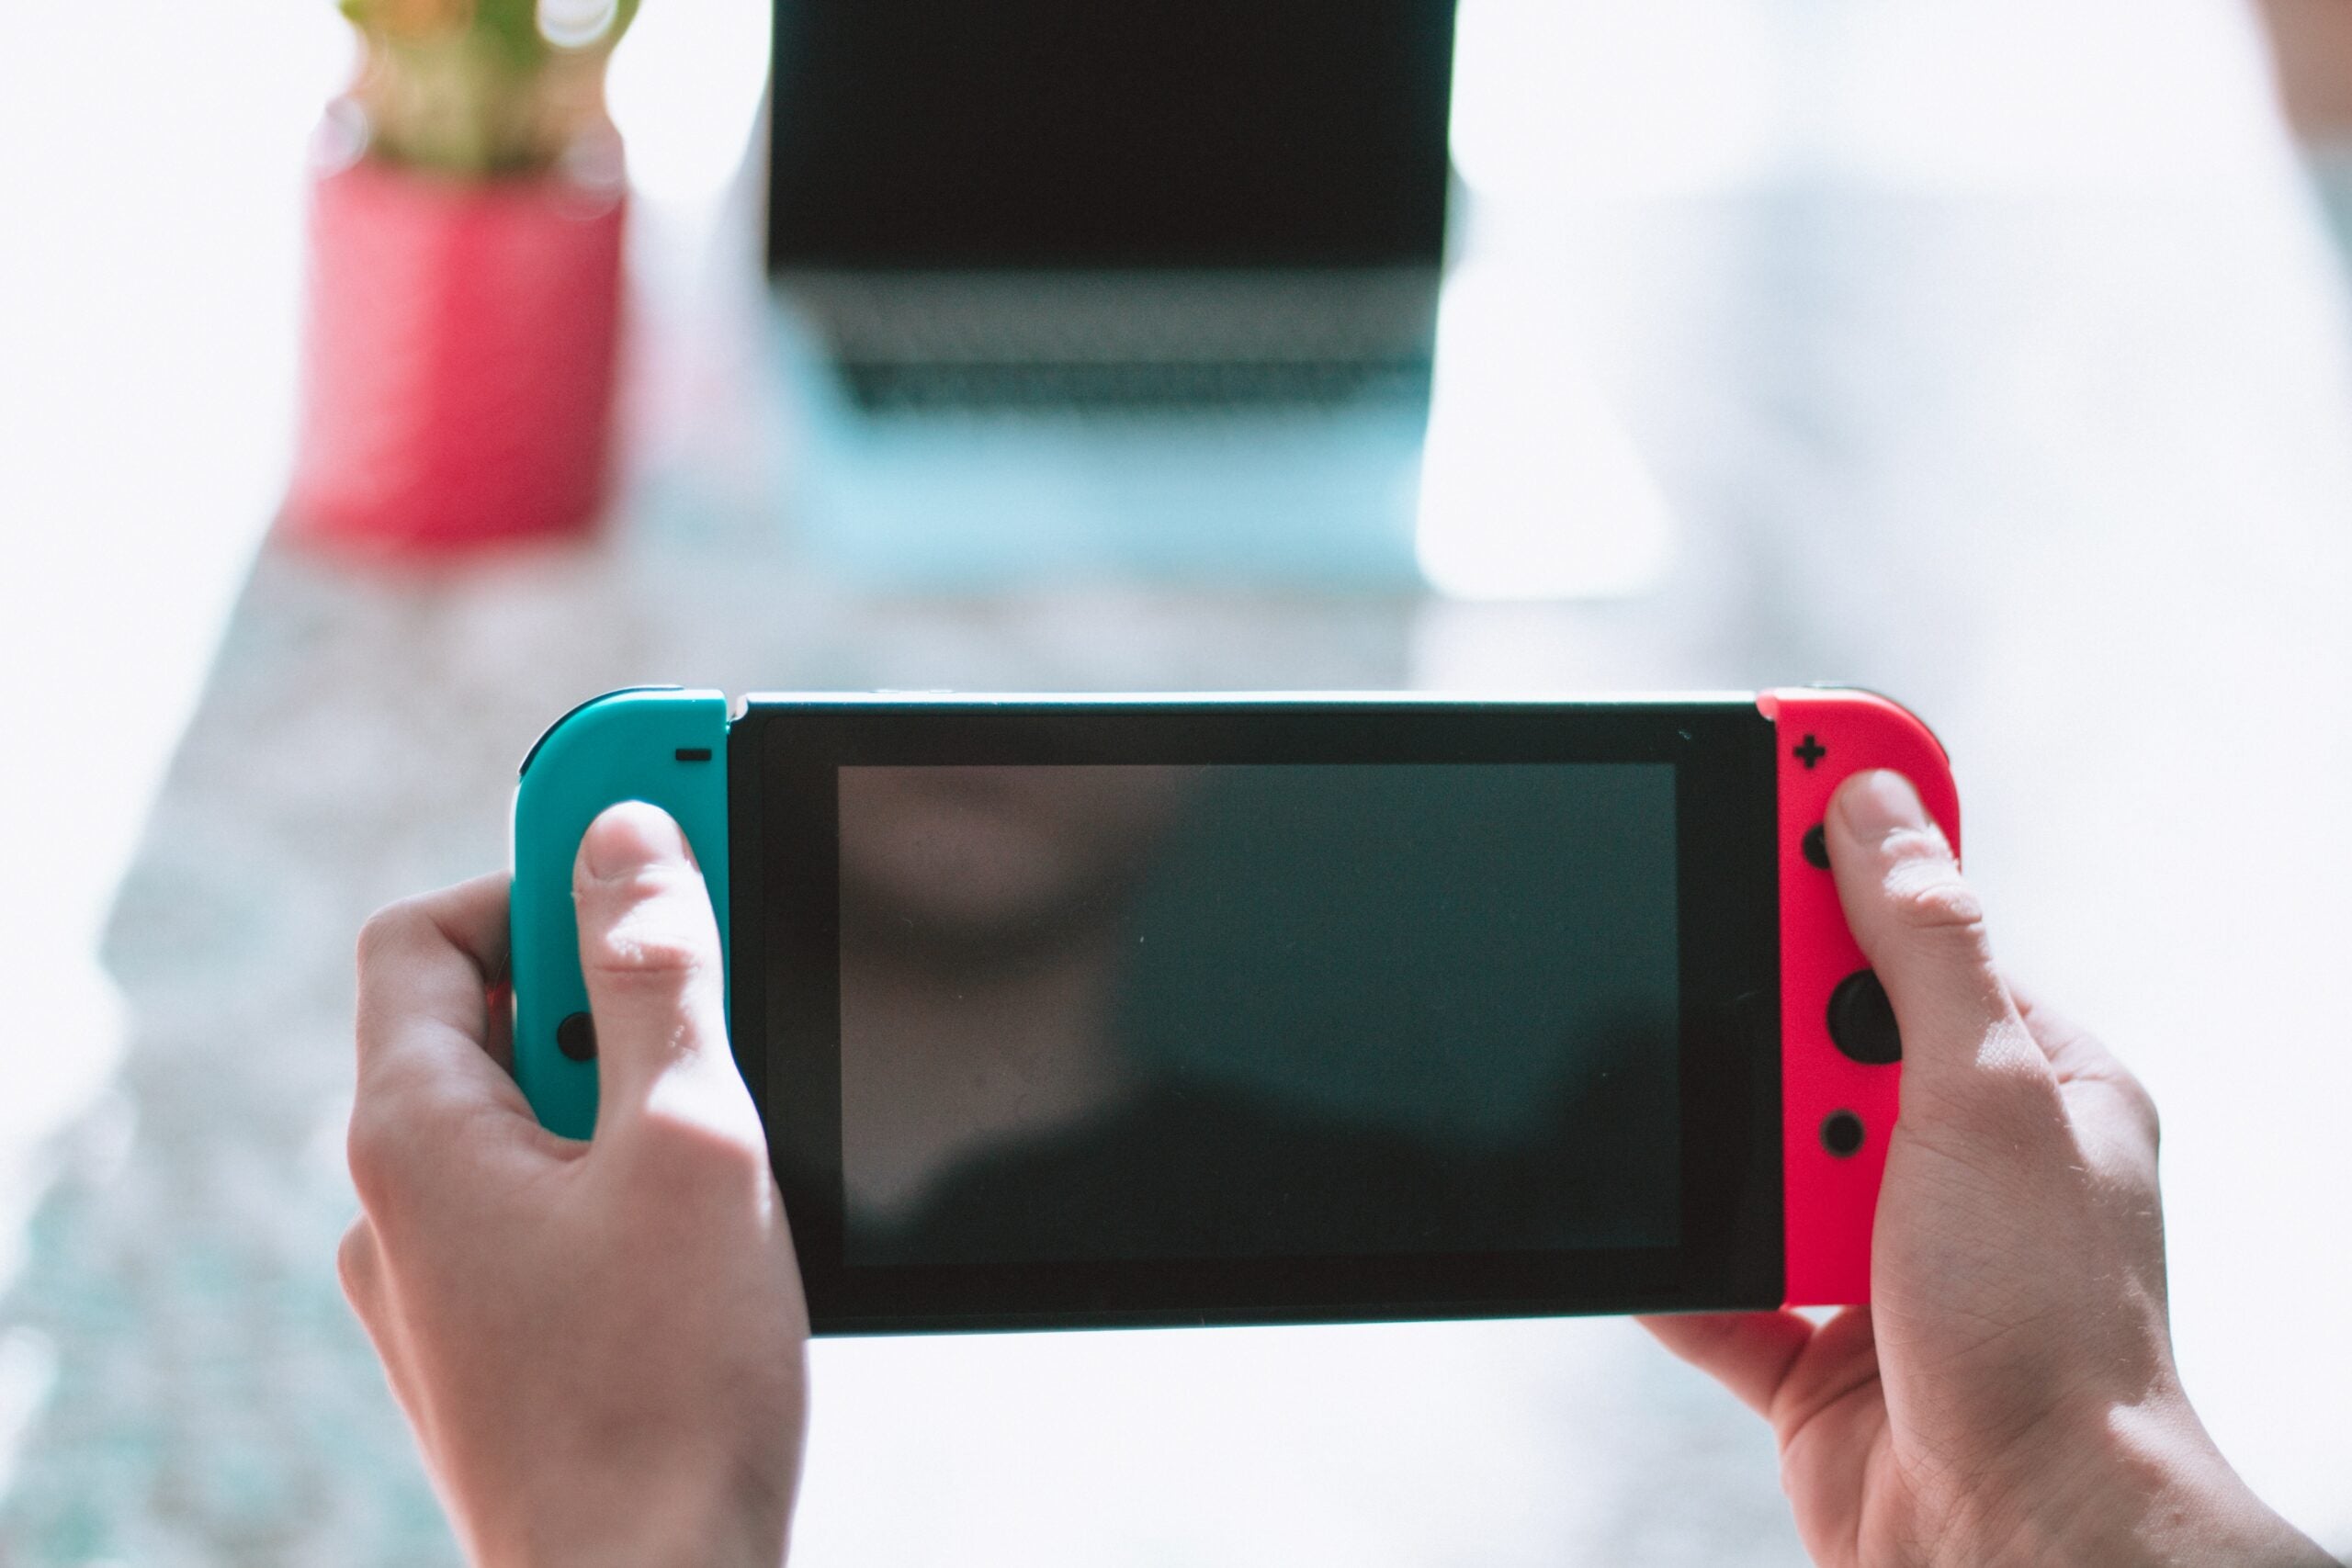 A person playing with a Nintendo Switch over a white marble countertop during the day.